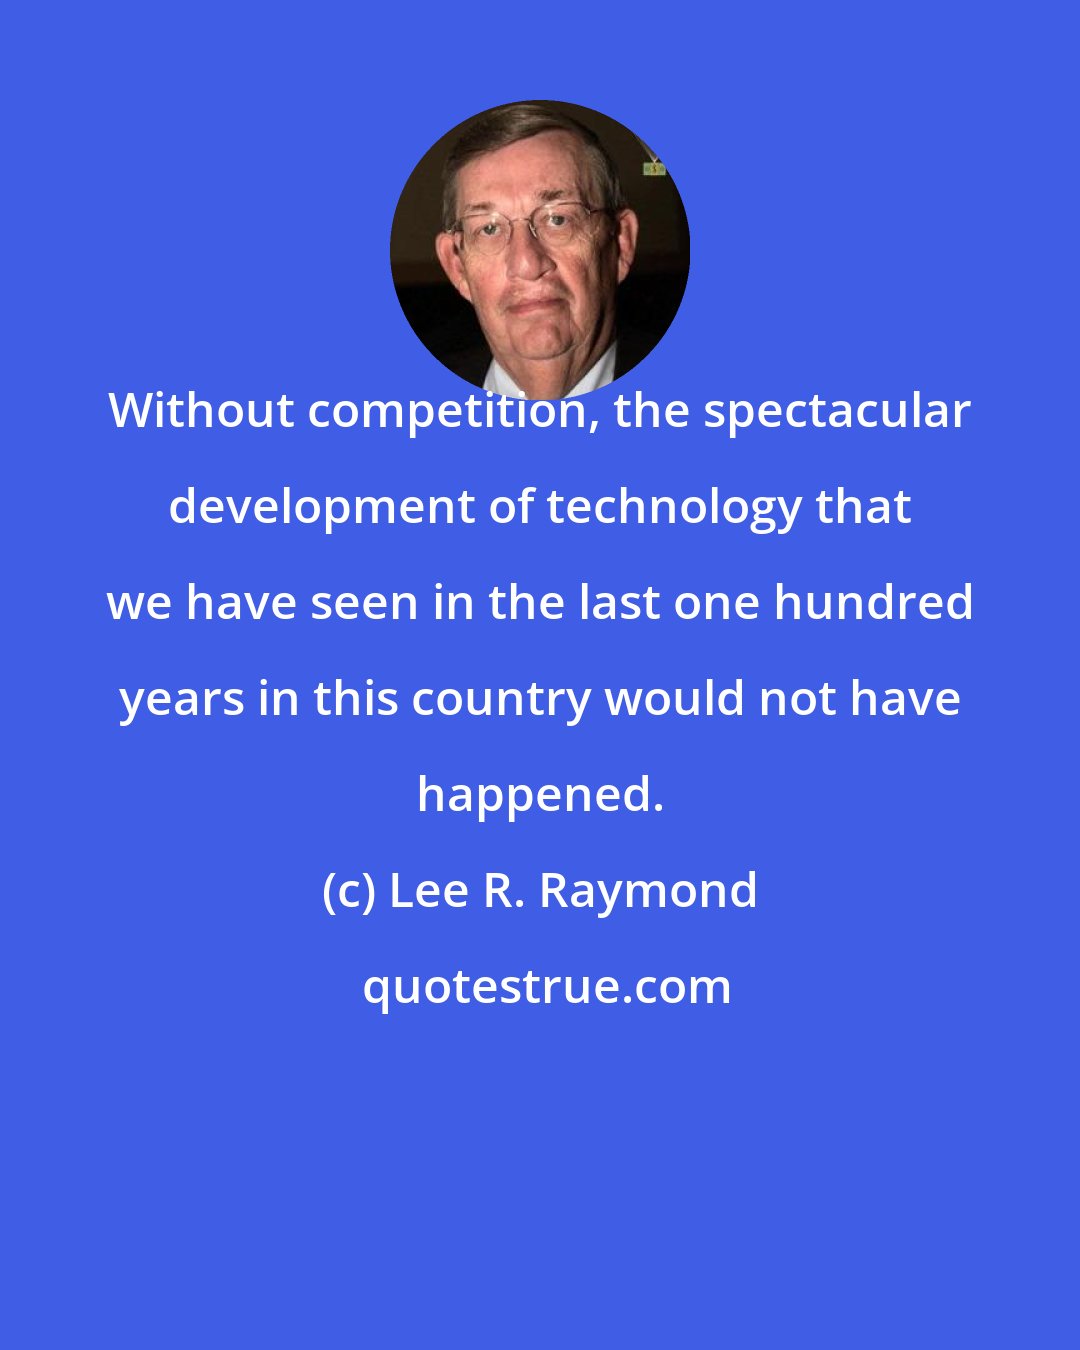 Lee R. Raymond: Without competition, the spectacular development of technology that we have seen in the last one hundred years in this country would not have happened.